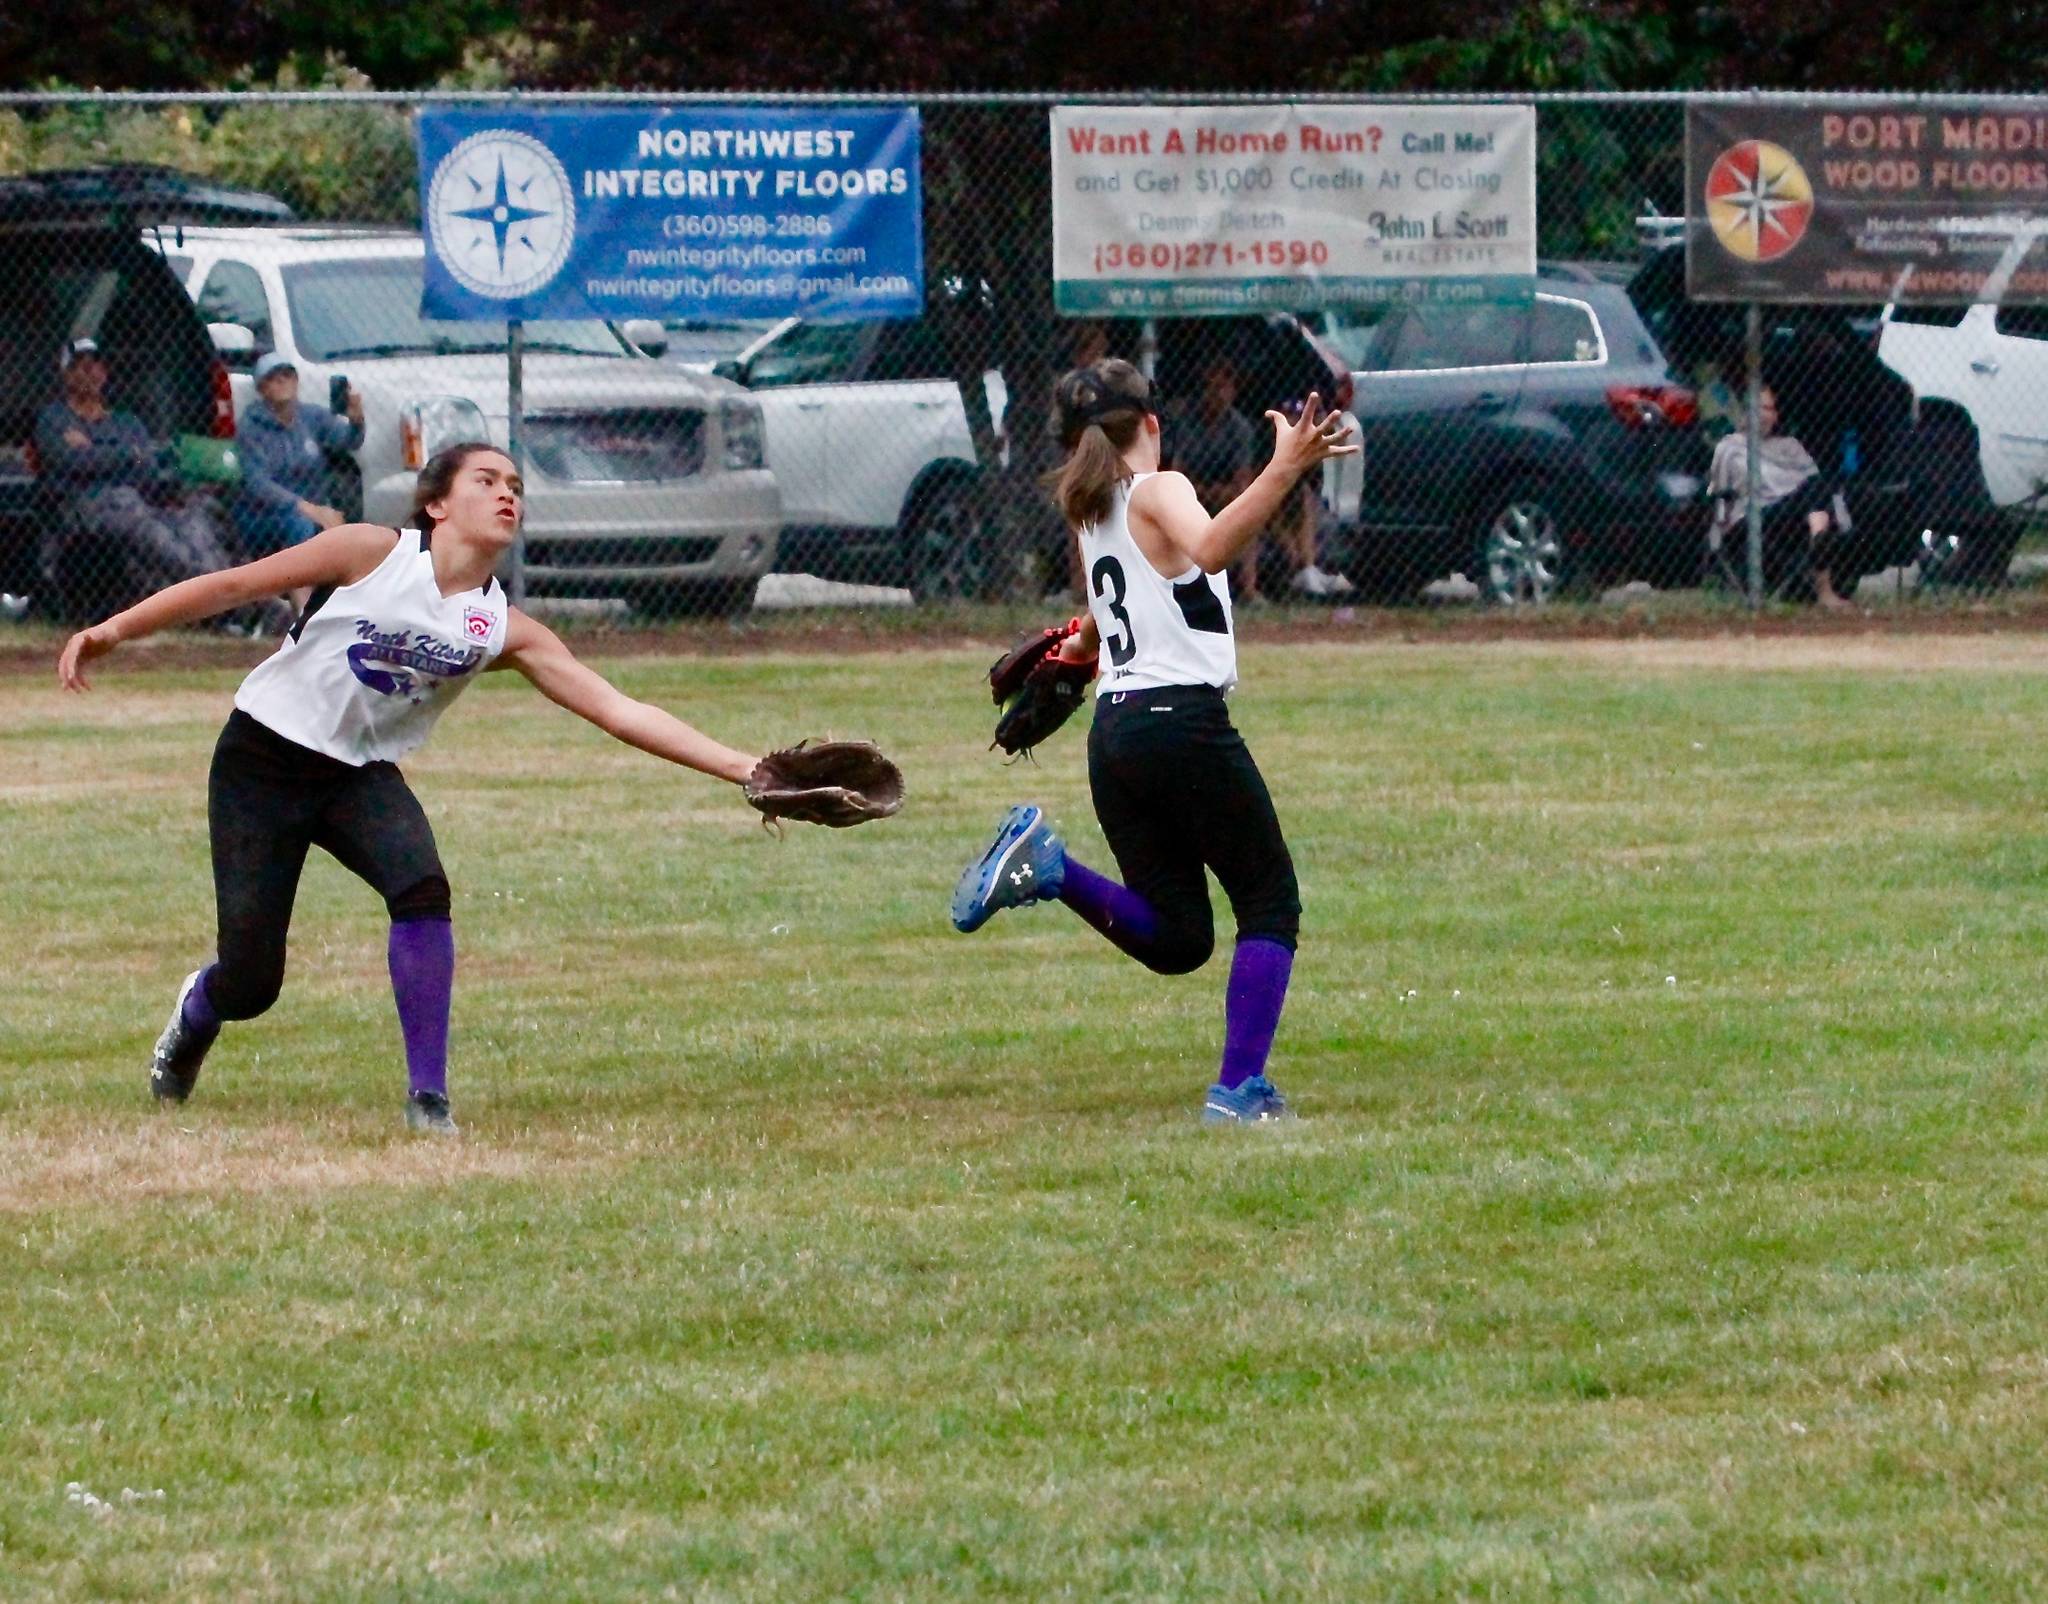 Jaynie Davis (3) makes the grab coming over from leftfield as Layla Baker backs her up. (Mark Krulish/Kitsap News Group)